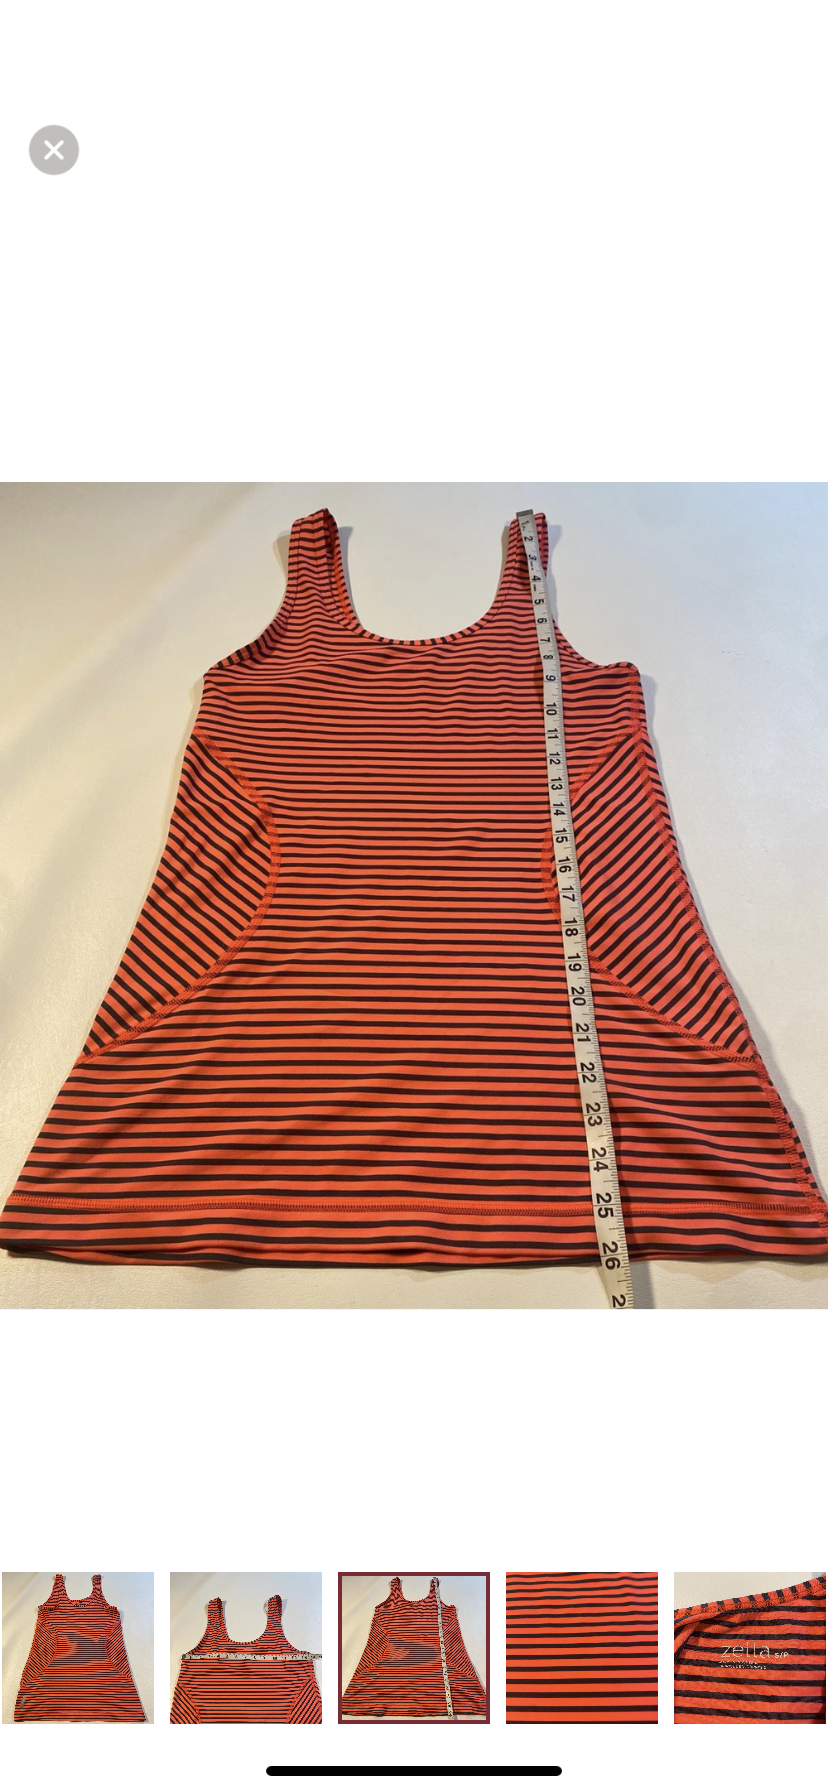 Zella Size S Bright Coral Striped Scoop Neck Wicking Workout Athletic Tank Top